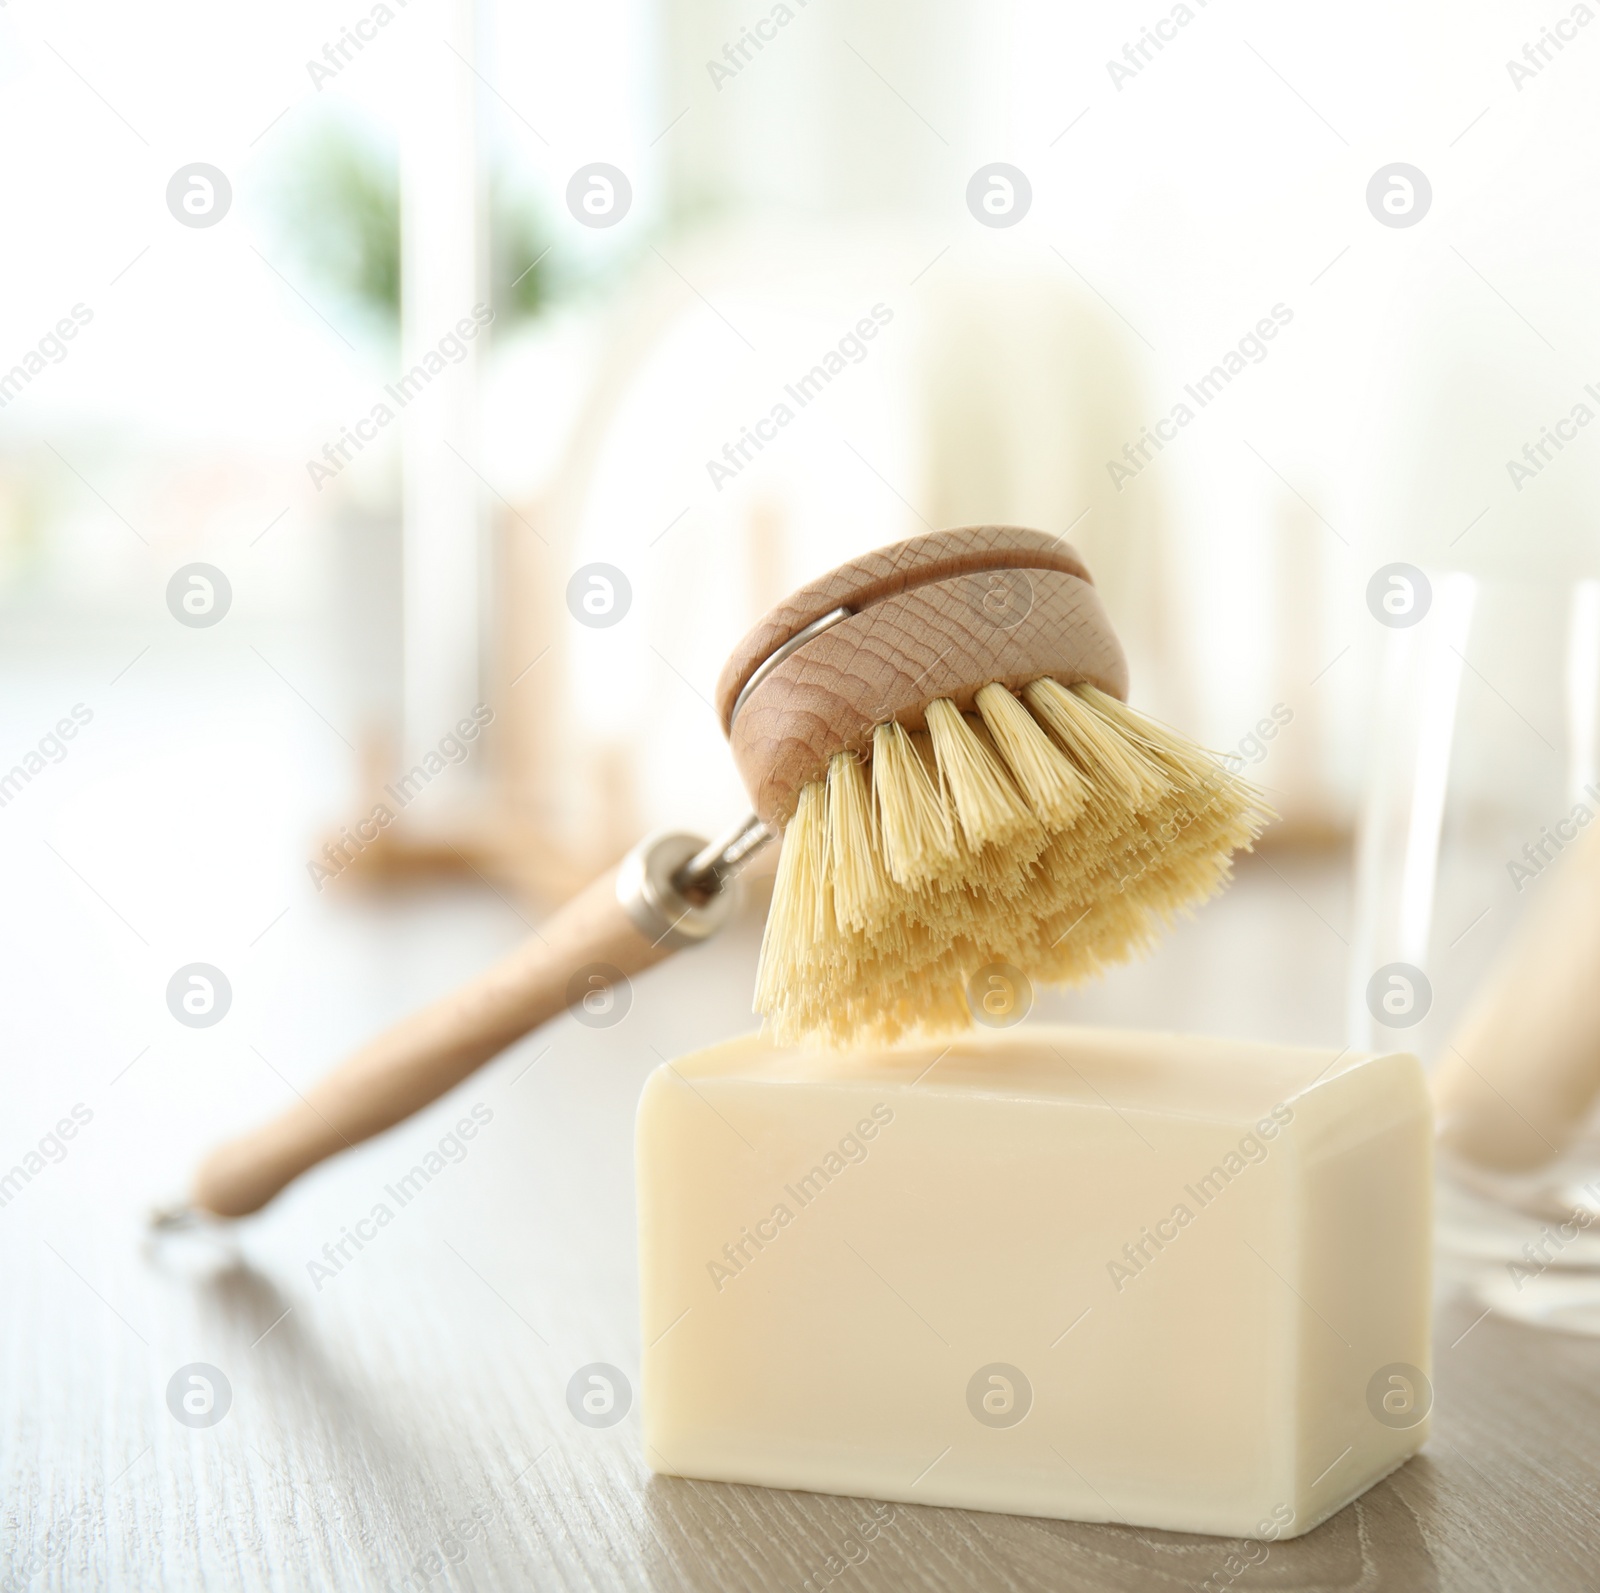 Photo of Cleaning brush and soap bar for dish washing on wooden table, closeup